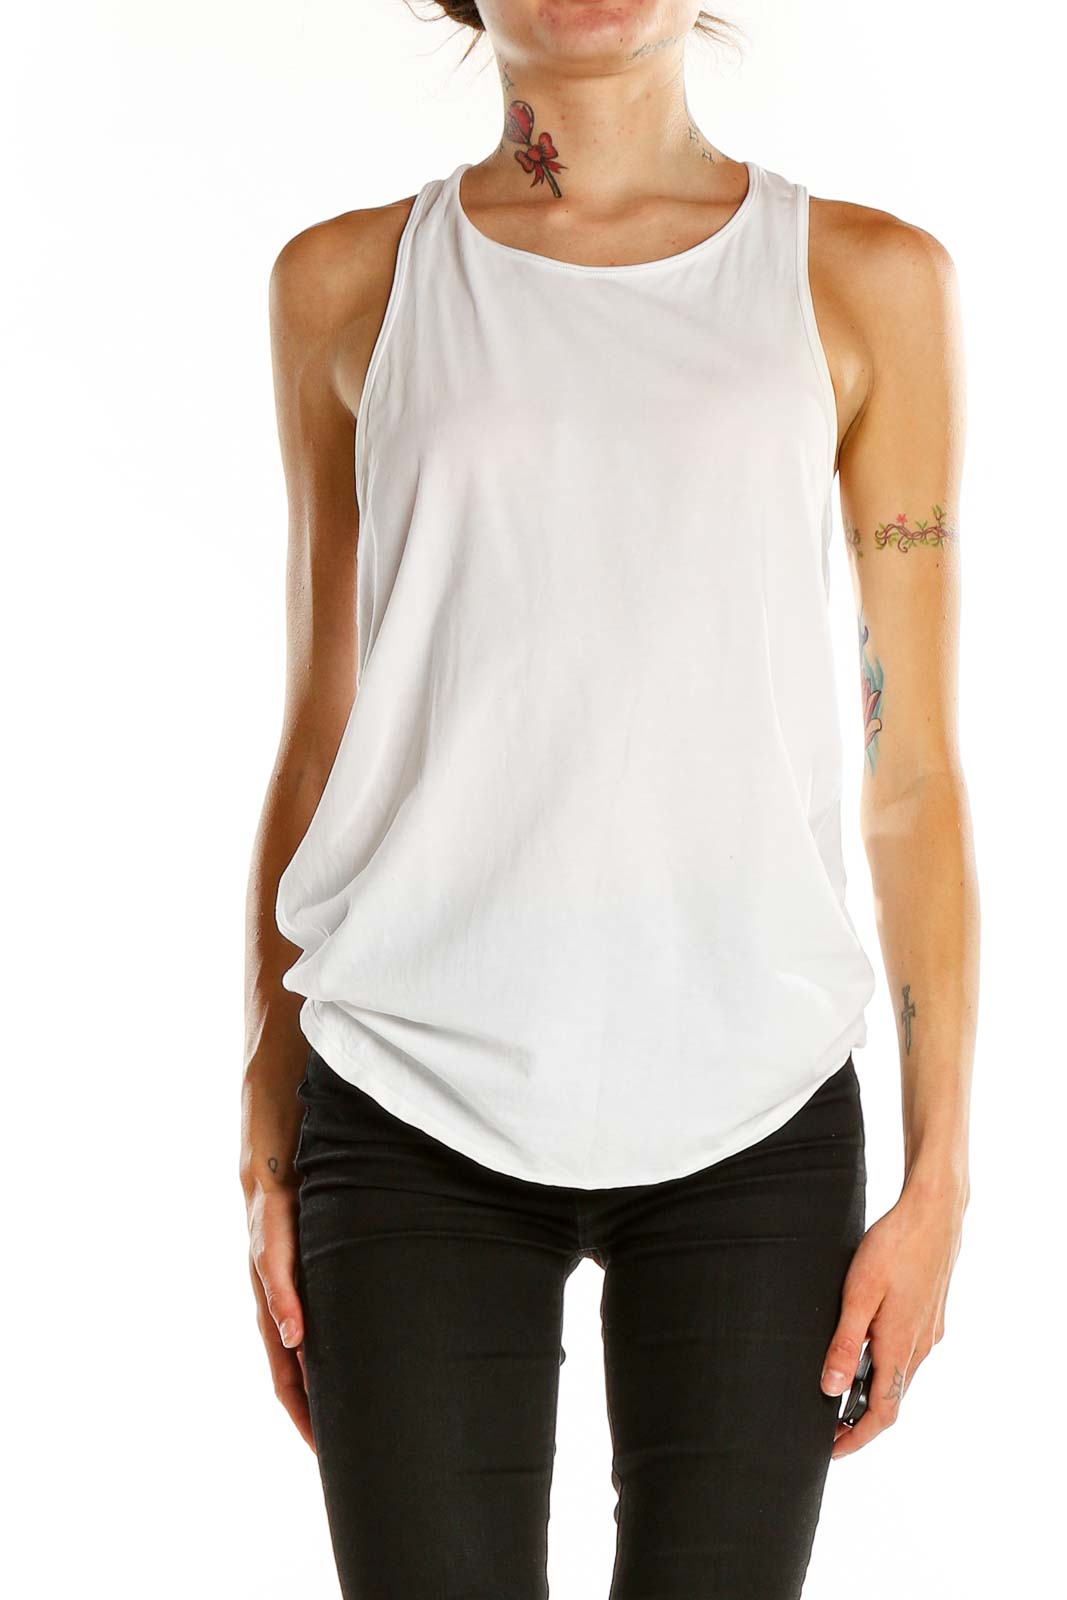 White Activewear Tank Top Front